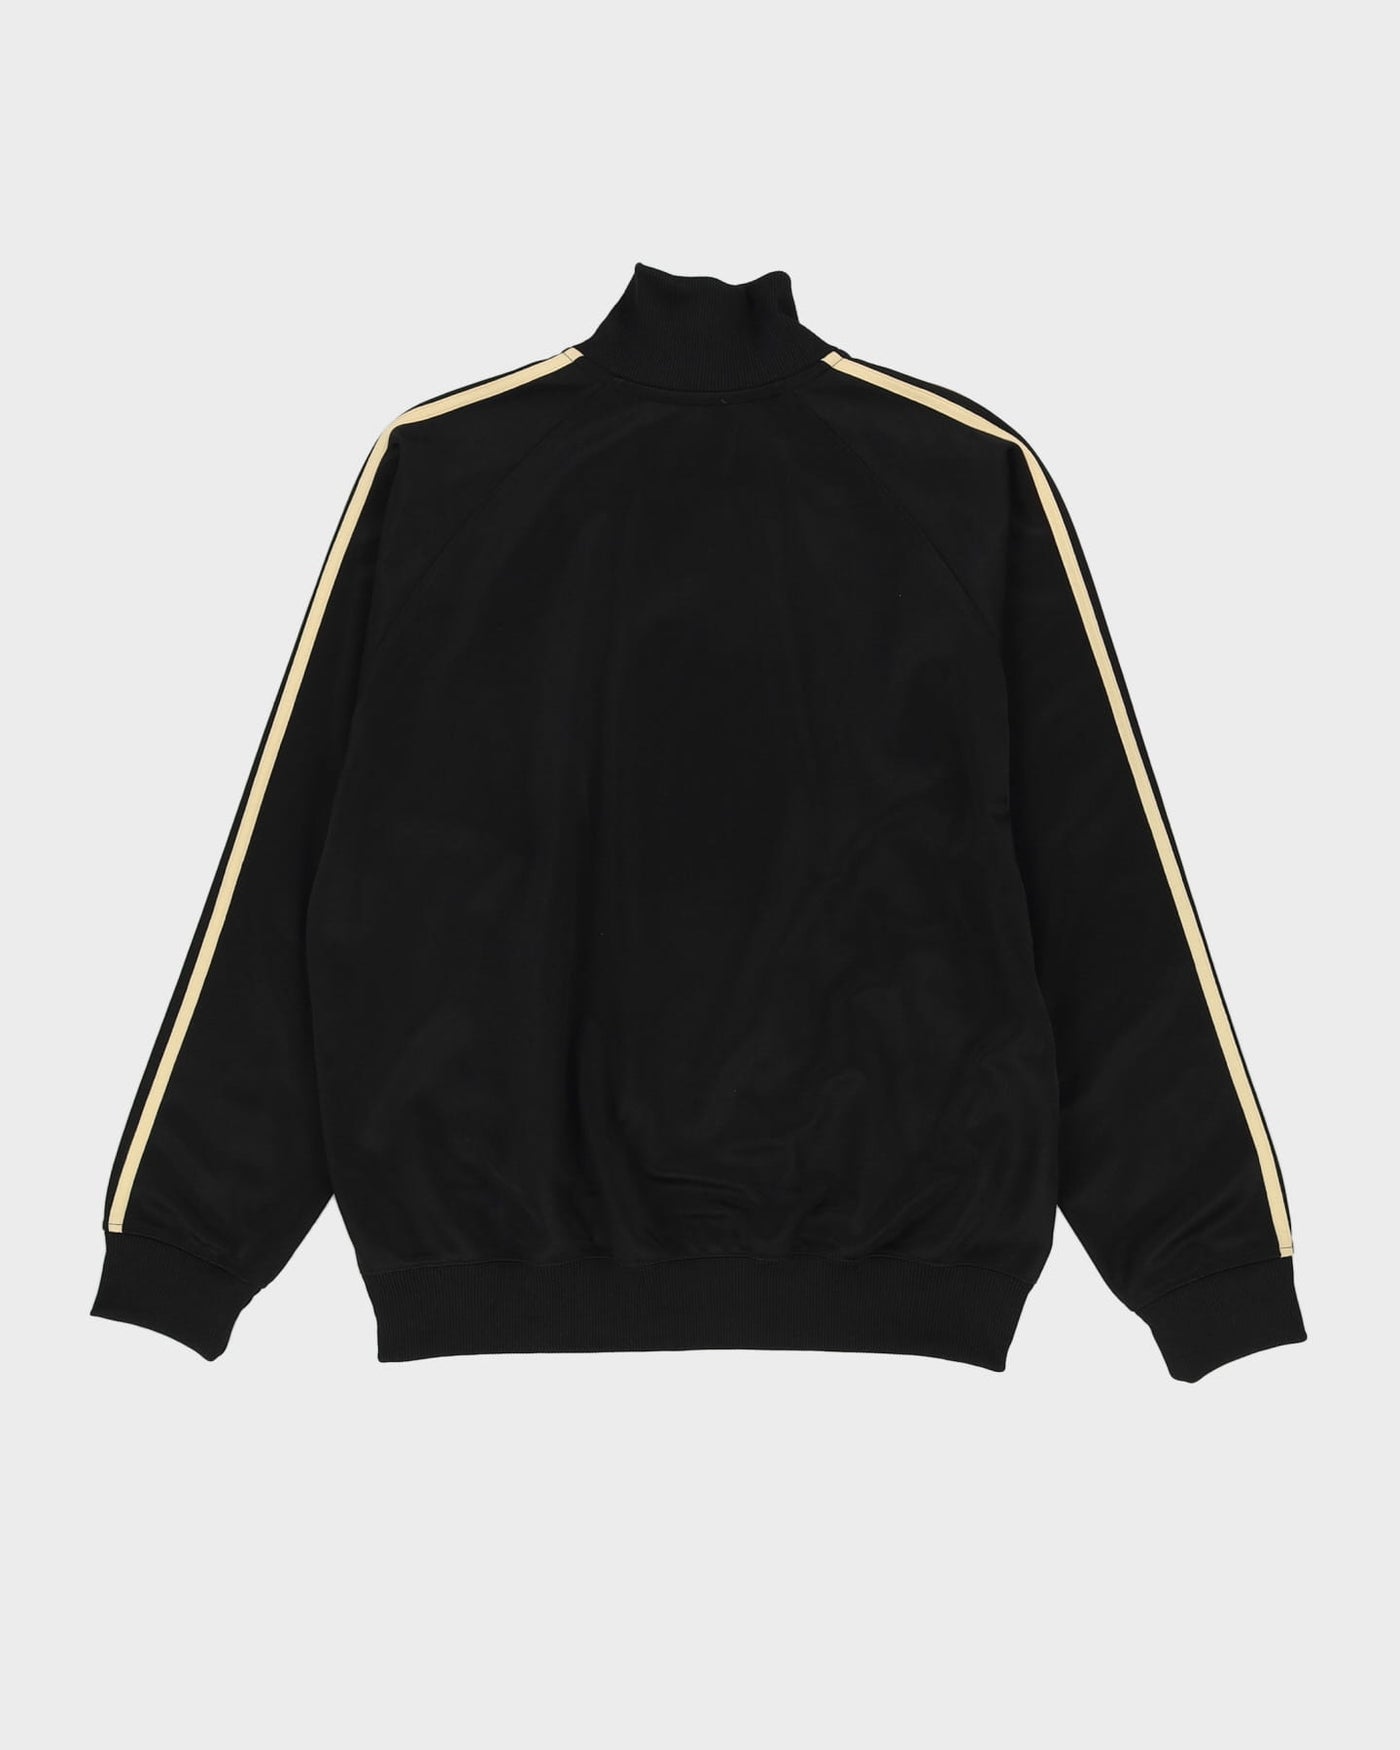 00s Fred Perry Black Track Jacket - L